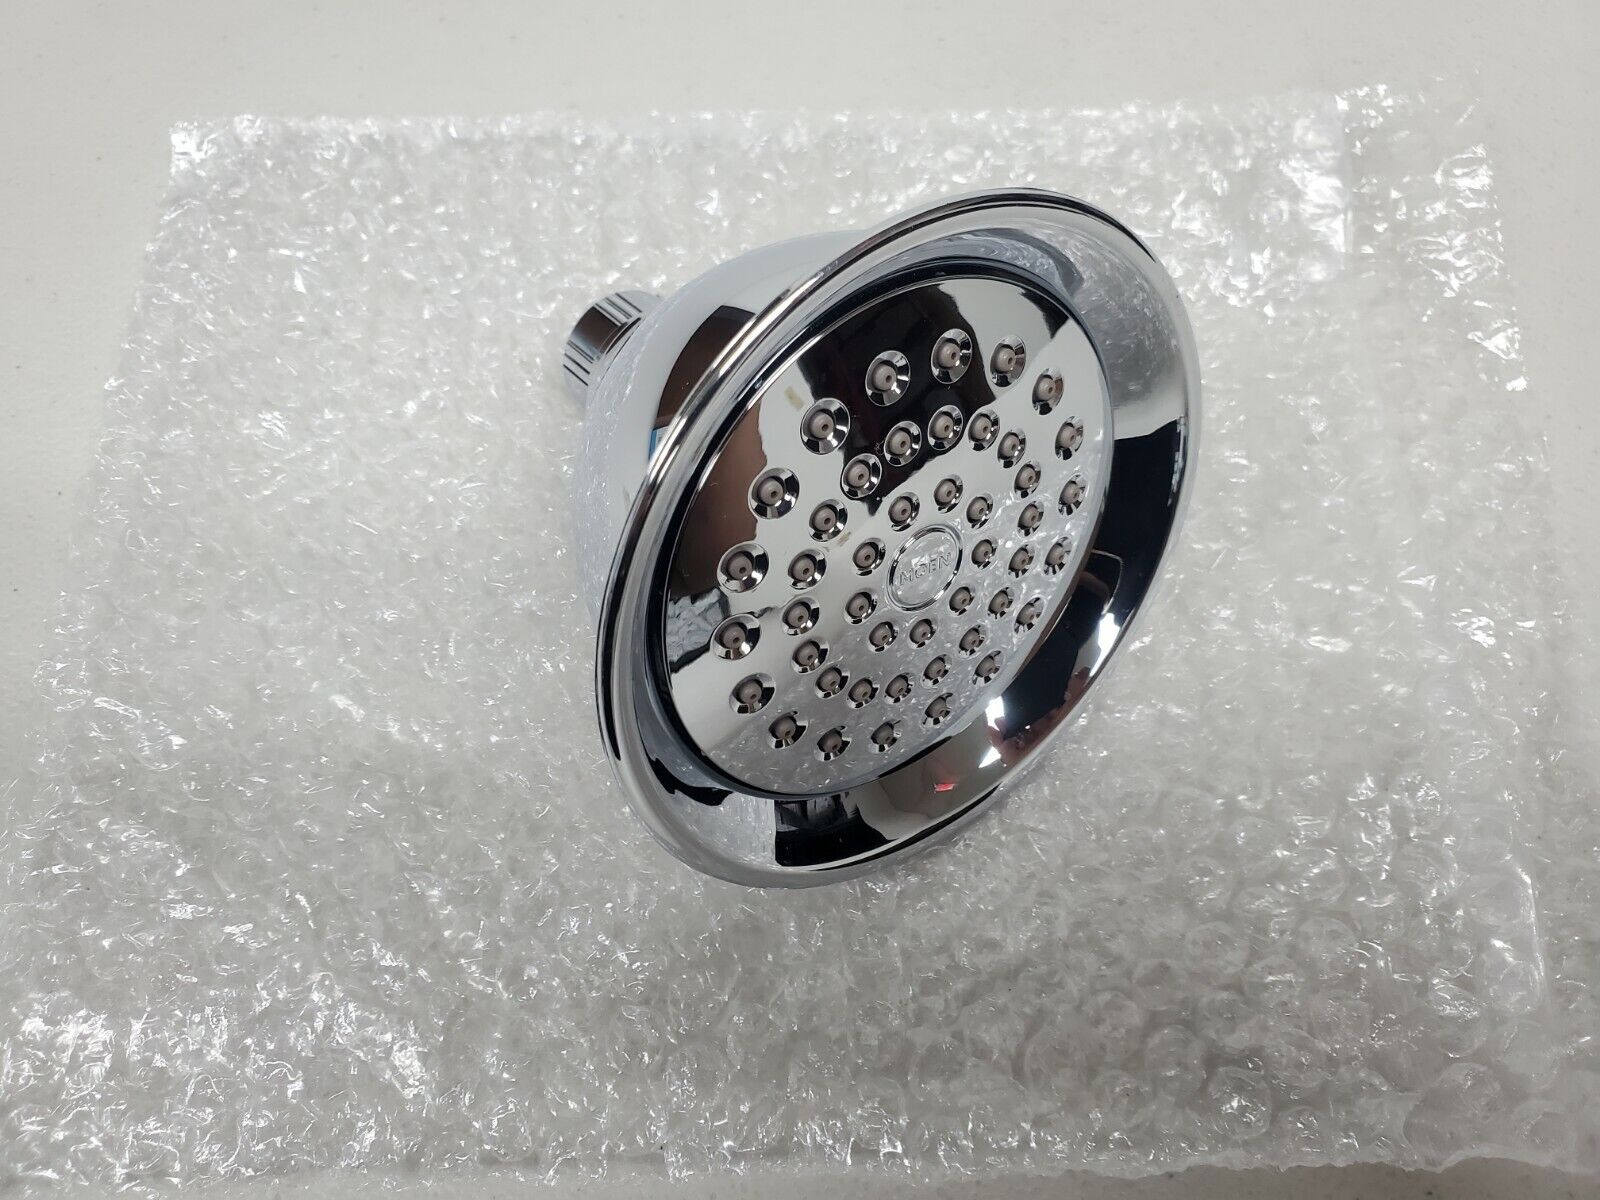 How To Assemble Earth Showerhead 2.0 GPM A112.18.1